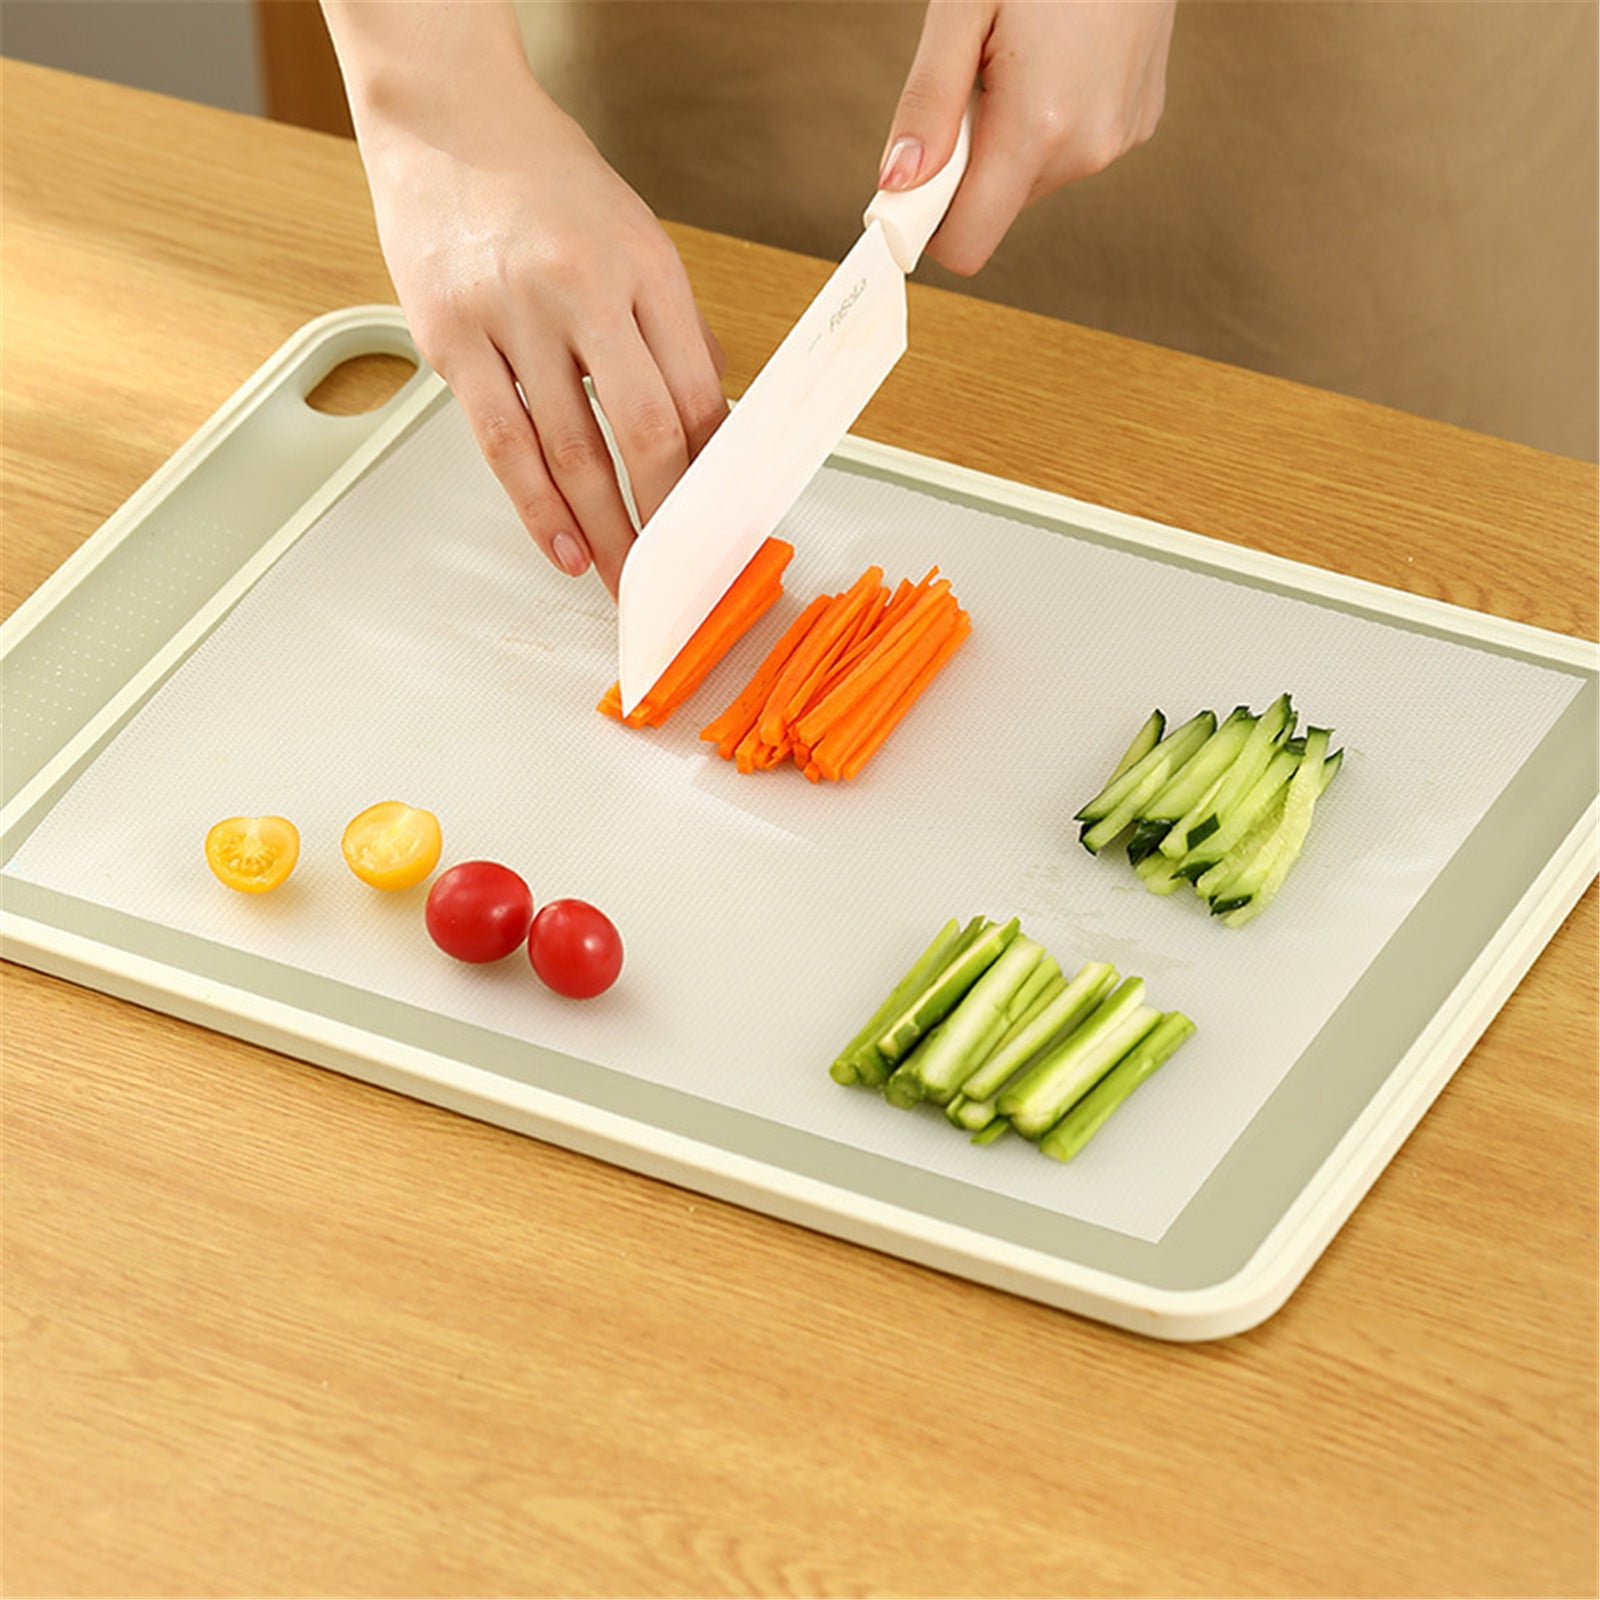 Plastimade Disposable Plastic Cutting Board, Easy to Use Built in Sliding Cutter, Great for Cooking Prep,commercial, Traveling, Tailgating, Camping, O